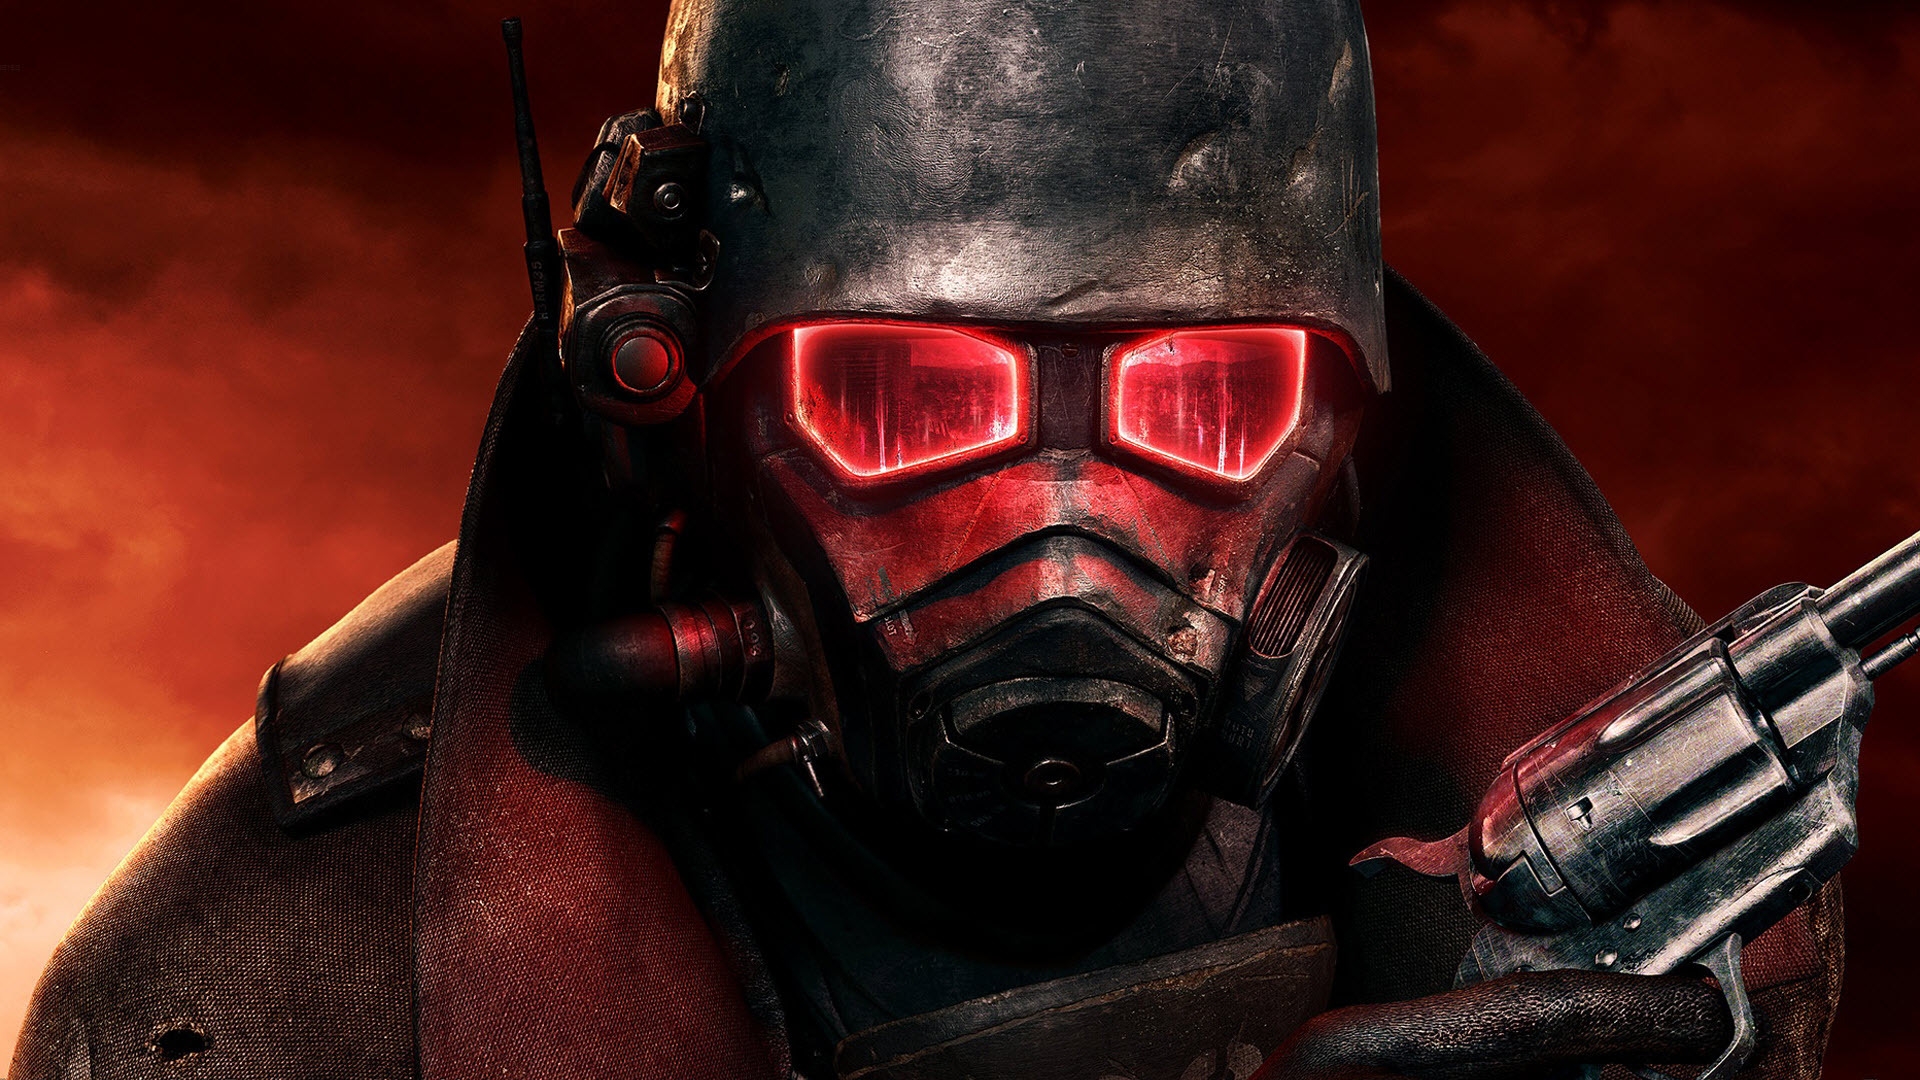 Fallout New Vegas for 1920 x 1080 HDTV 1080p resolution